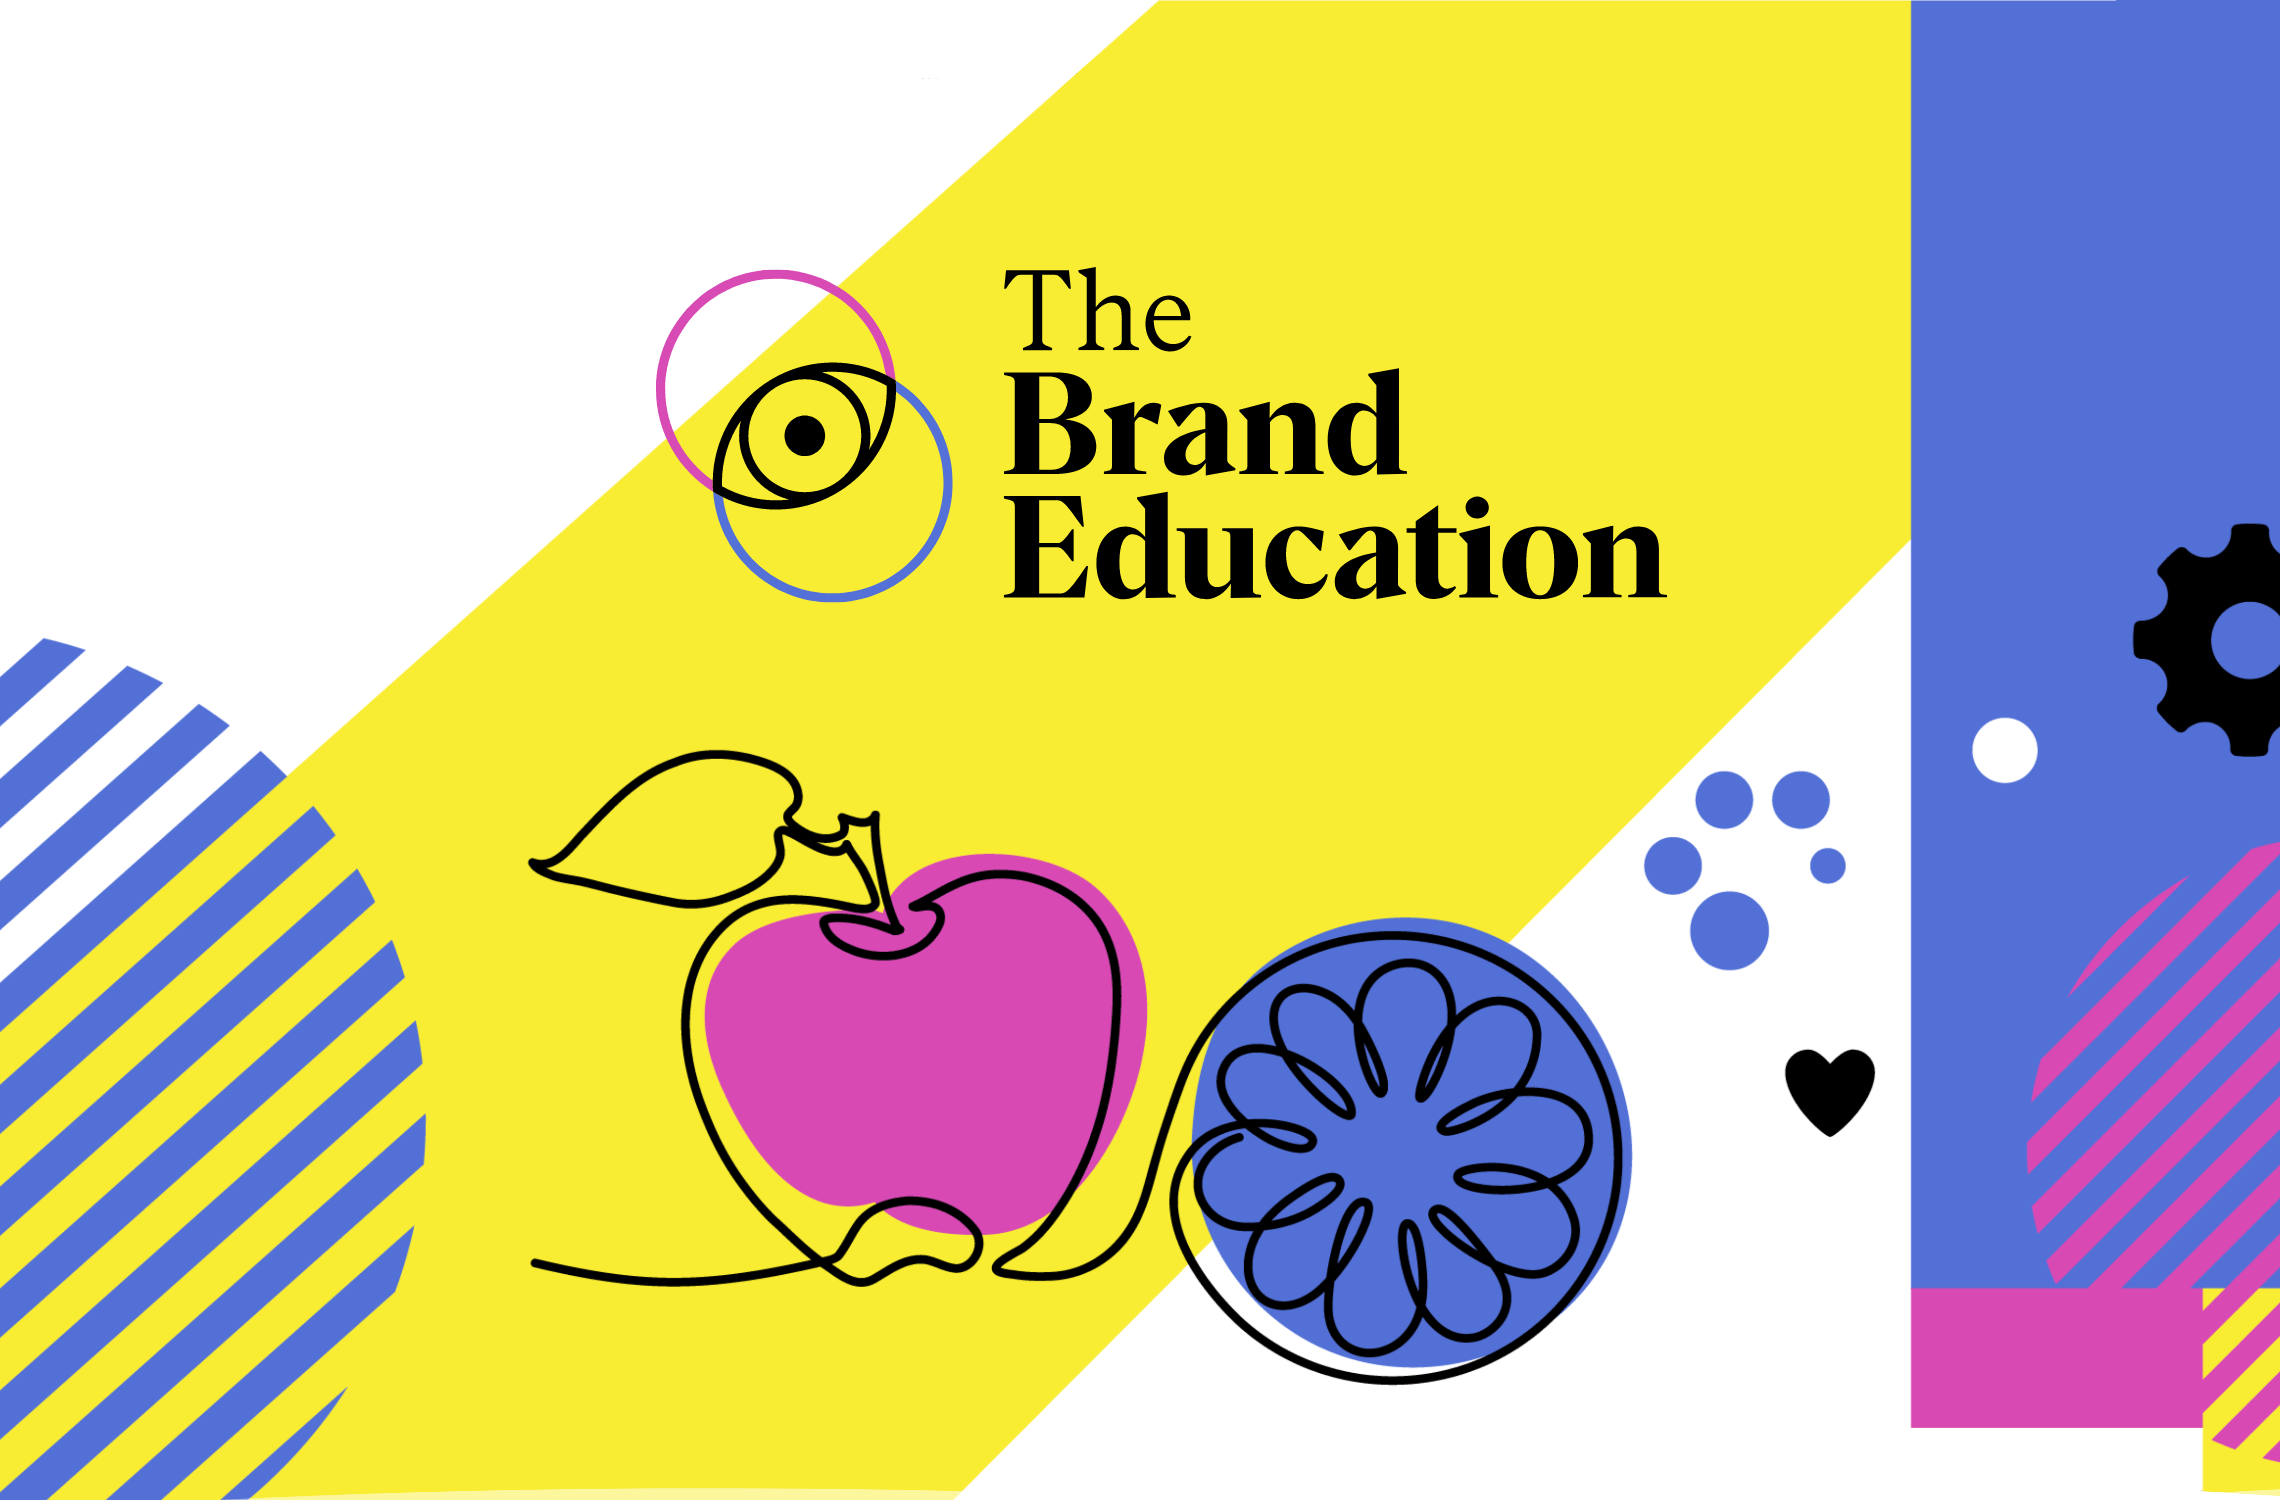 The Brand Education